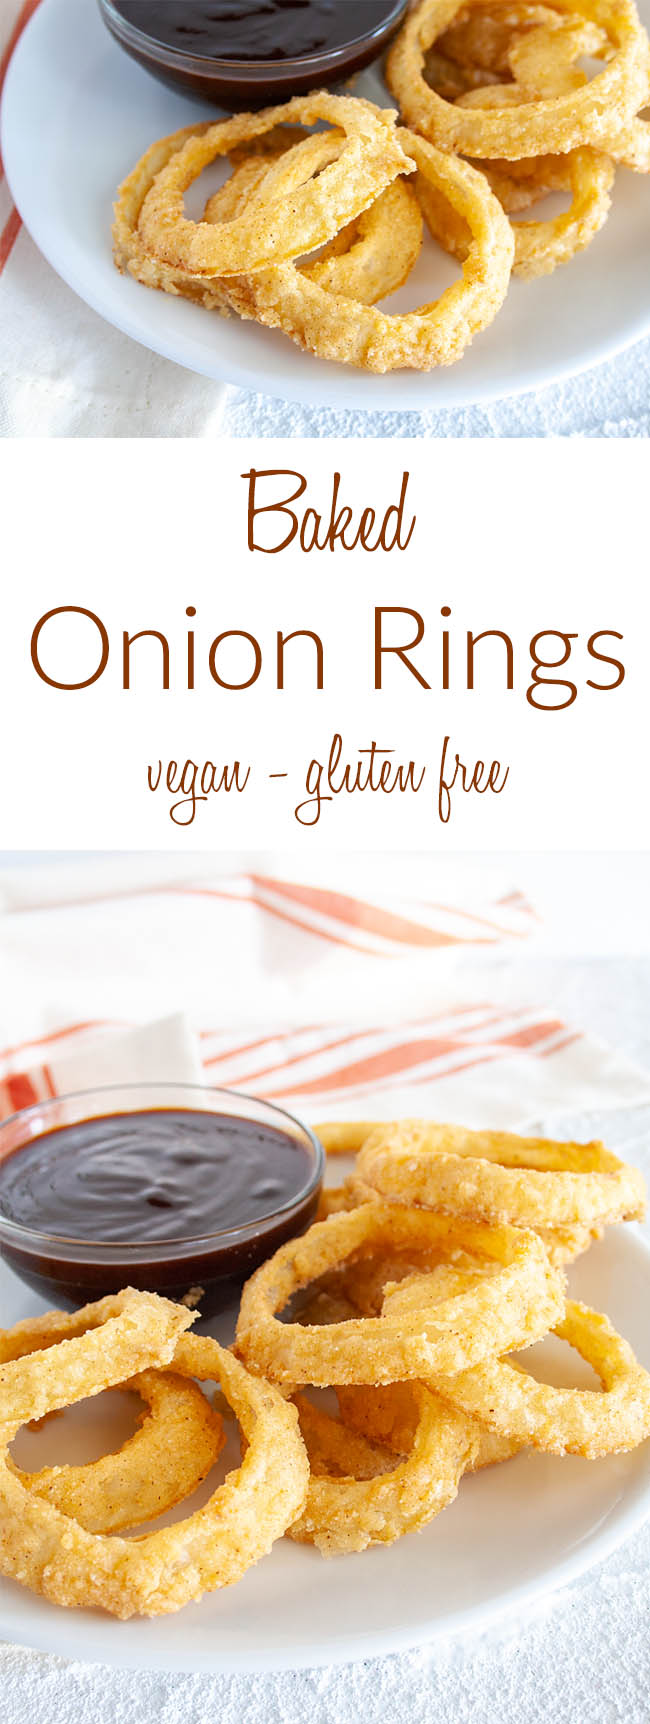 Baked Vegan Onion Rings collage photo with text.